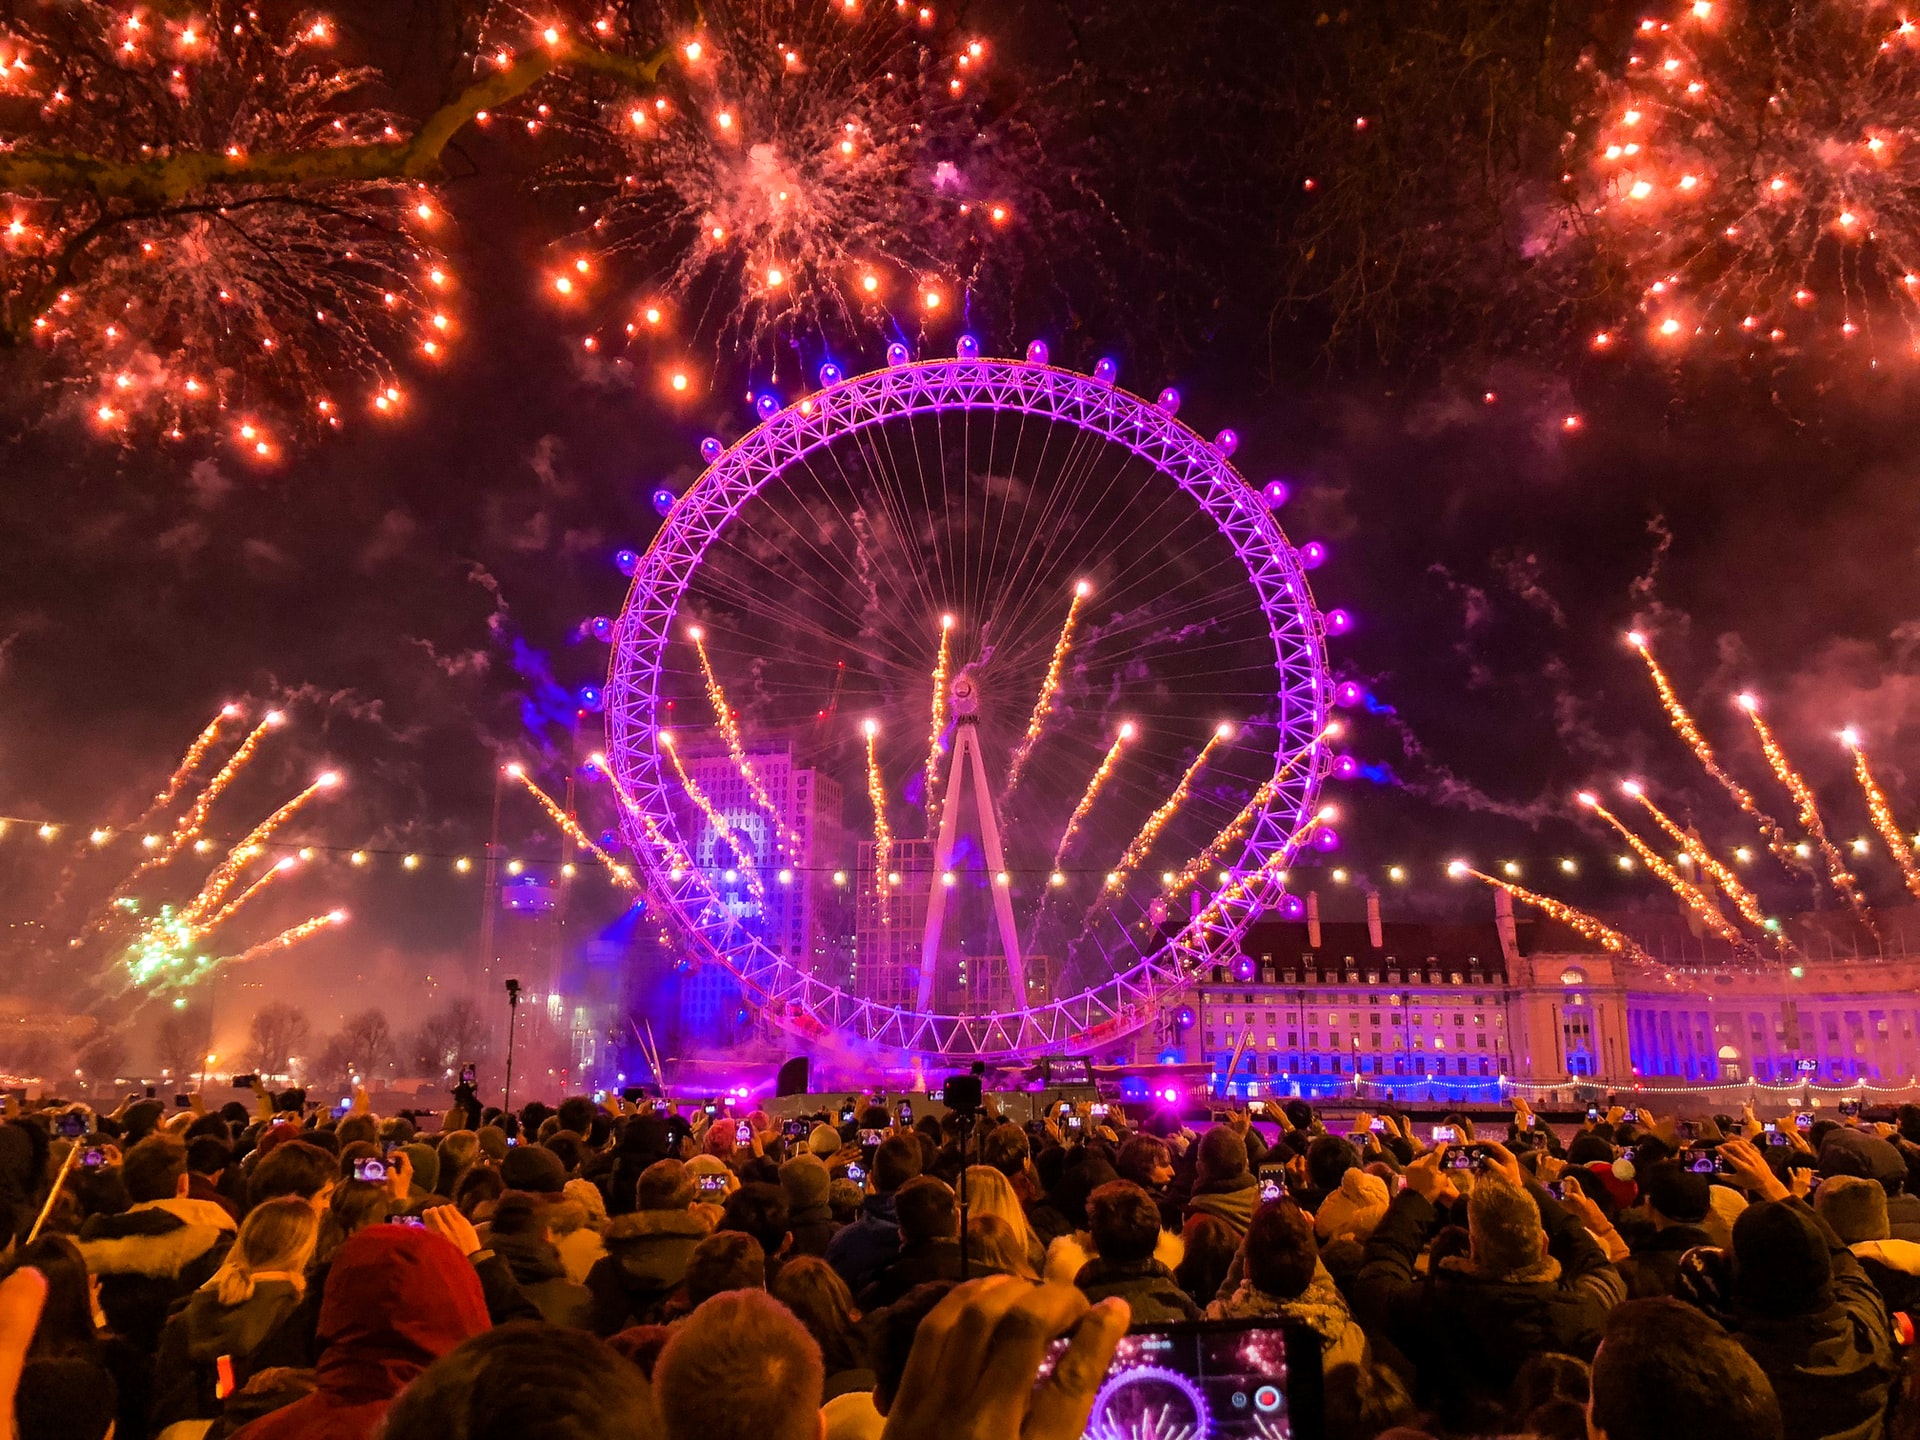 New Year's Eve fireworks at the London Eye in London